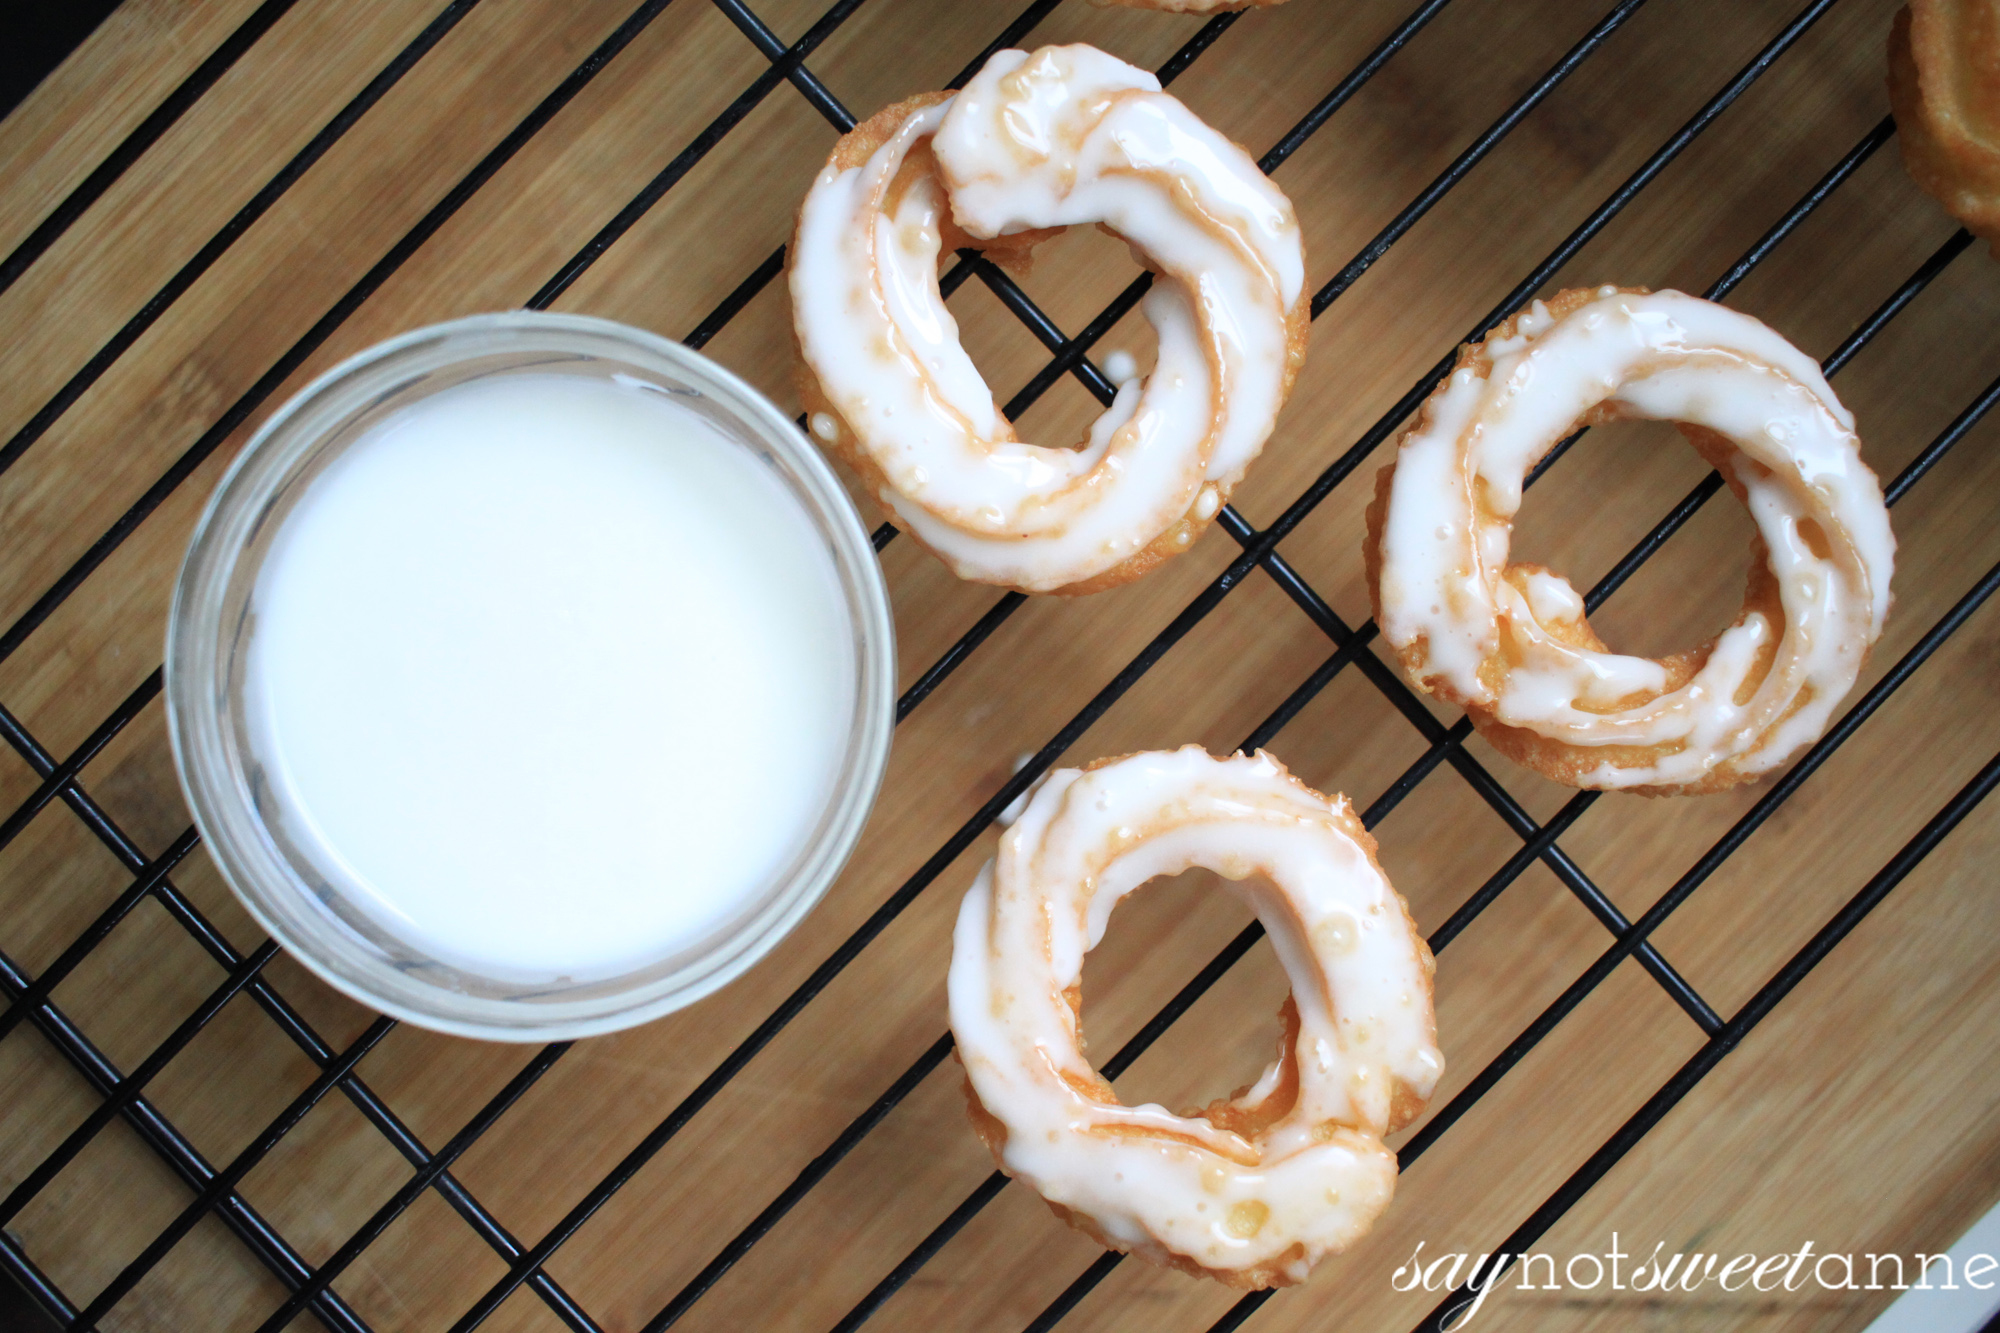 Simplified and Easy French Crullers! Perfect for a weekend treat, or to serve to guests. A time honored and somewhat tricky recipe demystified! |Saynotsweetanne.com